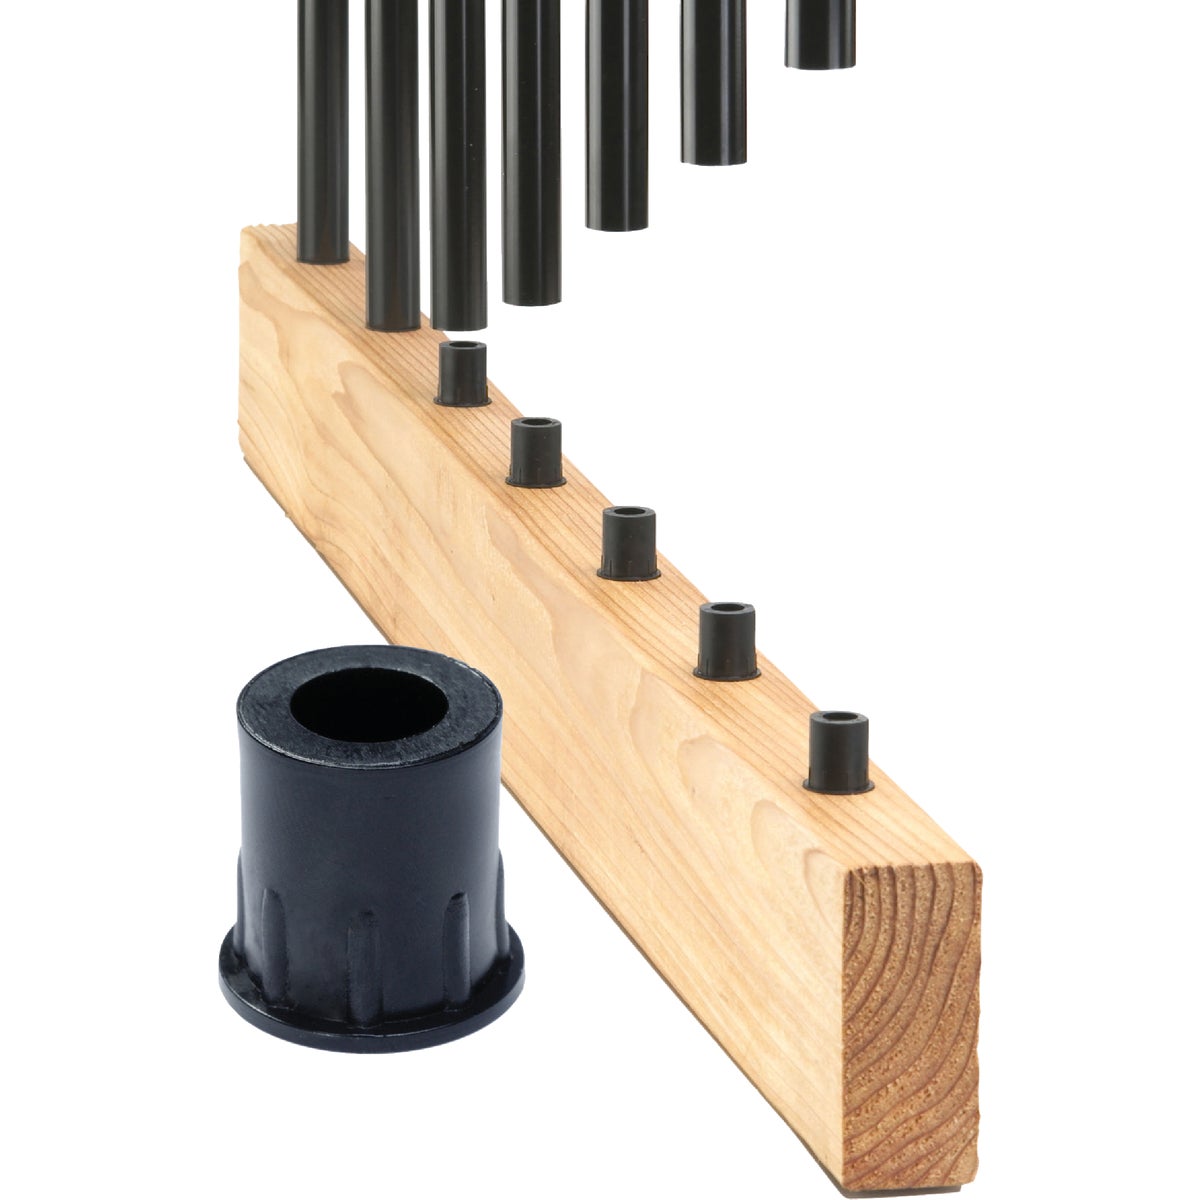 Item 160181, Deckorators classic baluster connector installs on the top and bottom of 